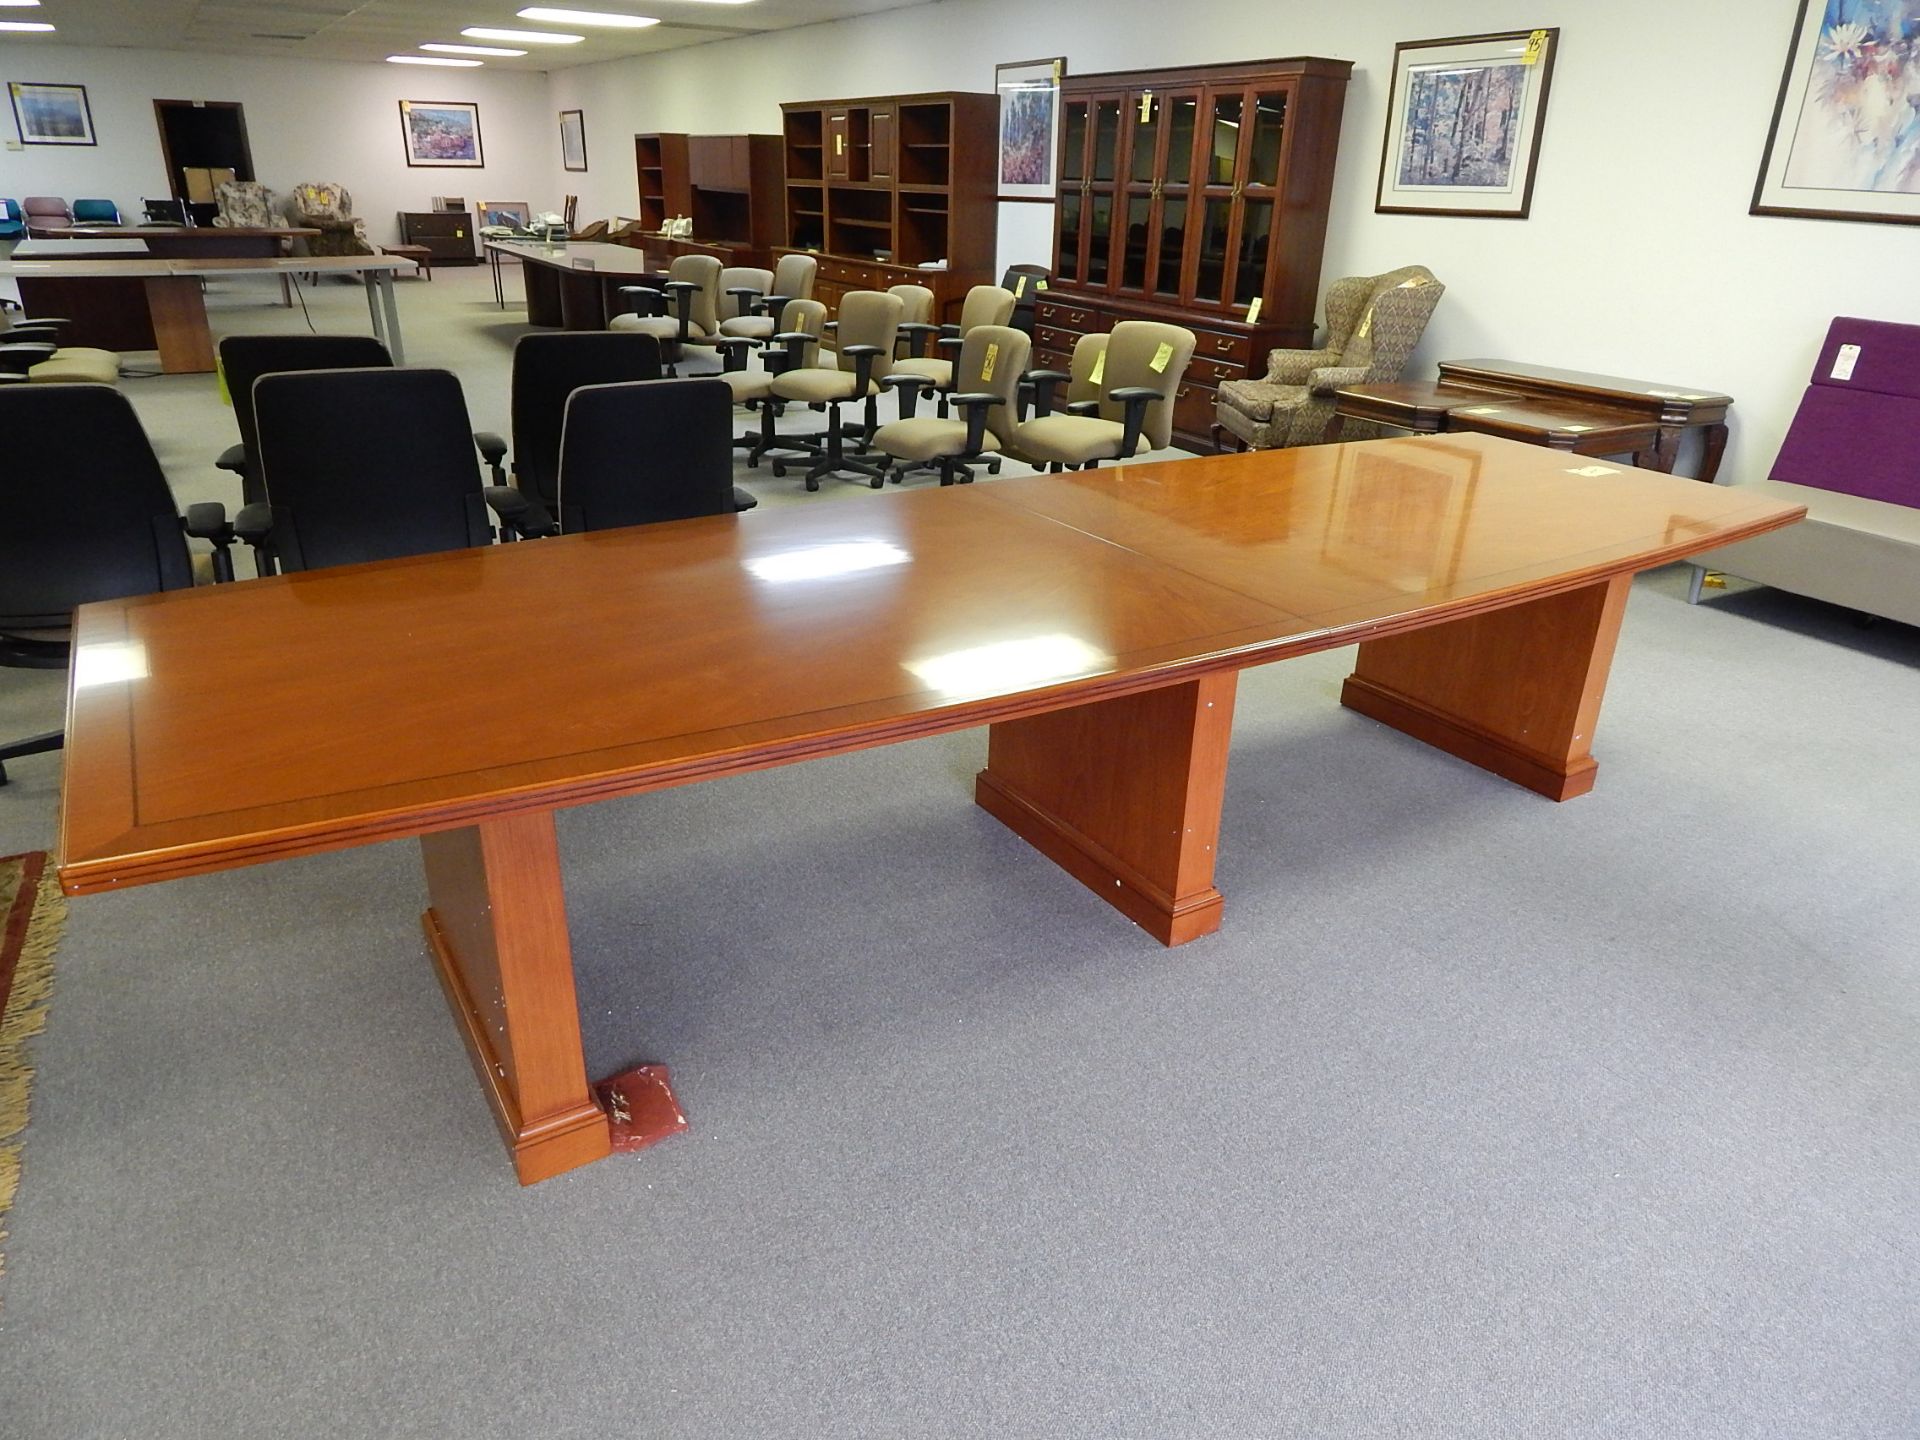 Sunburst Belmont Series 12' Boat-Shaped Conference Table, Executive Cherry, Model 7130-98, 48" W x